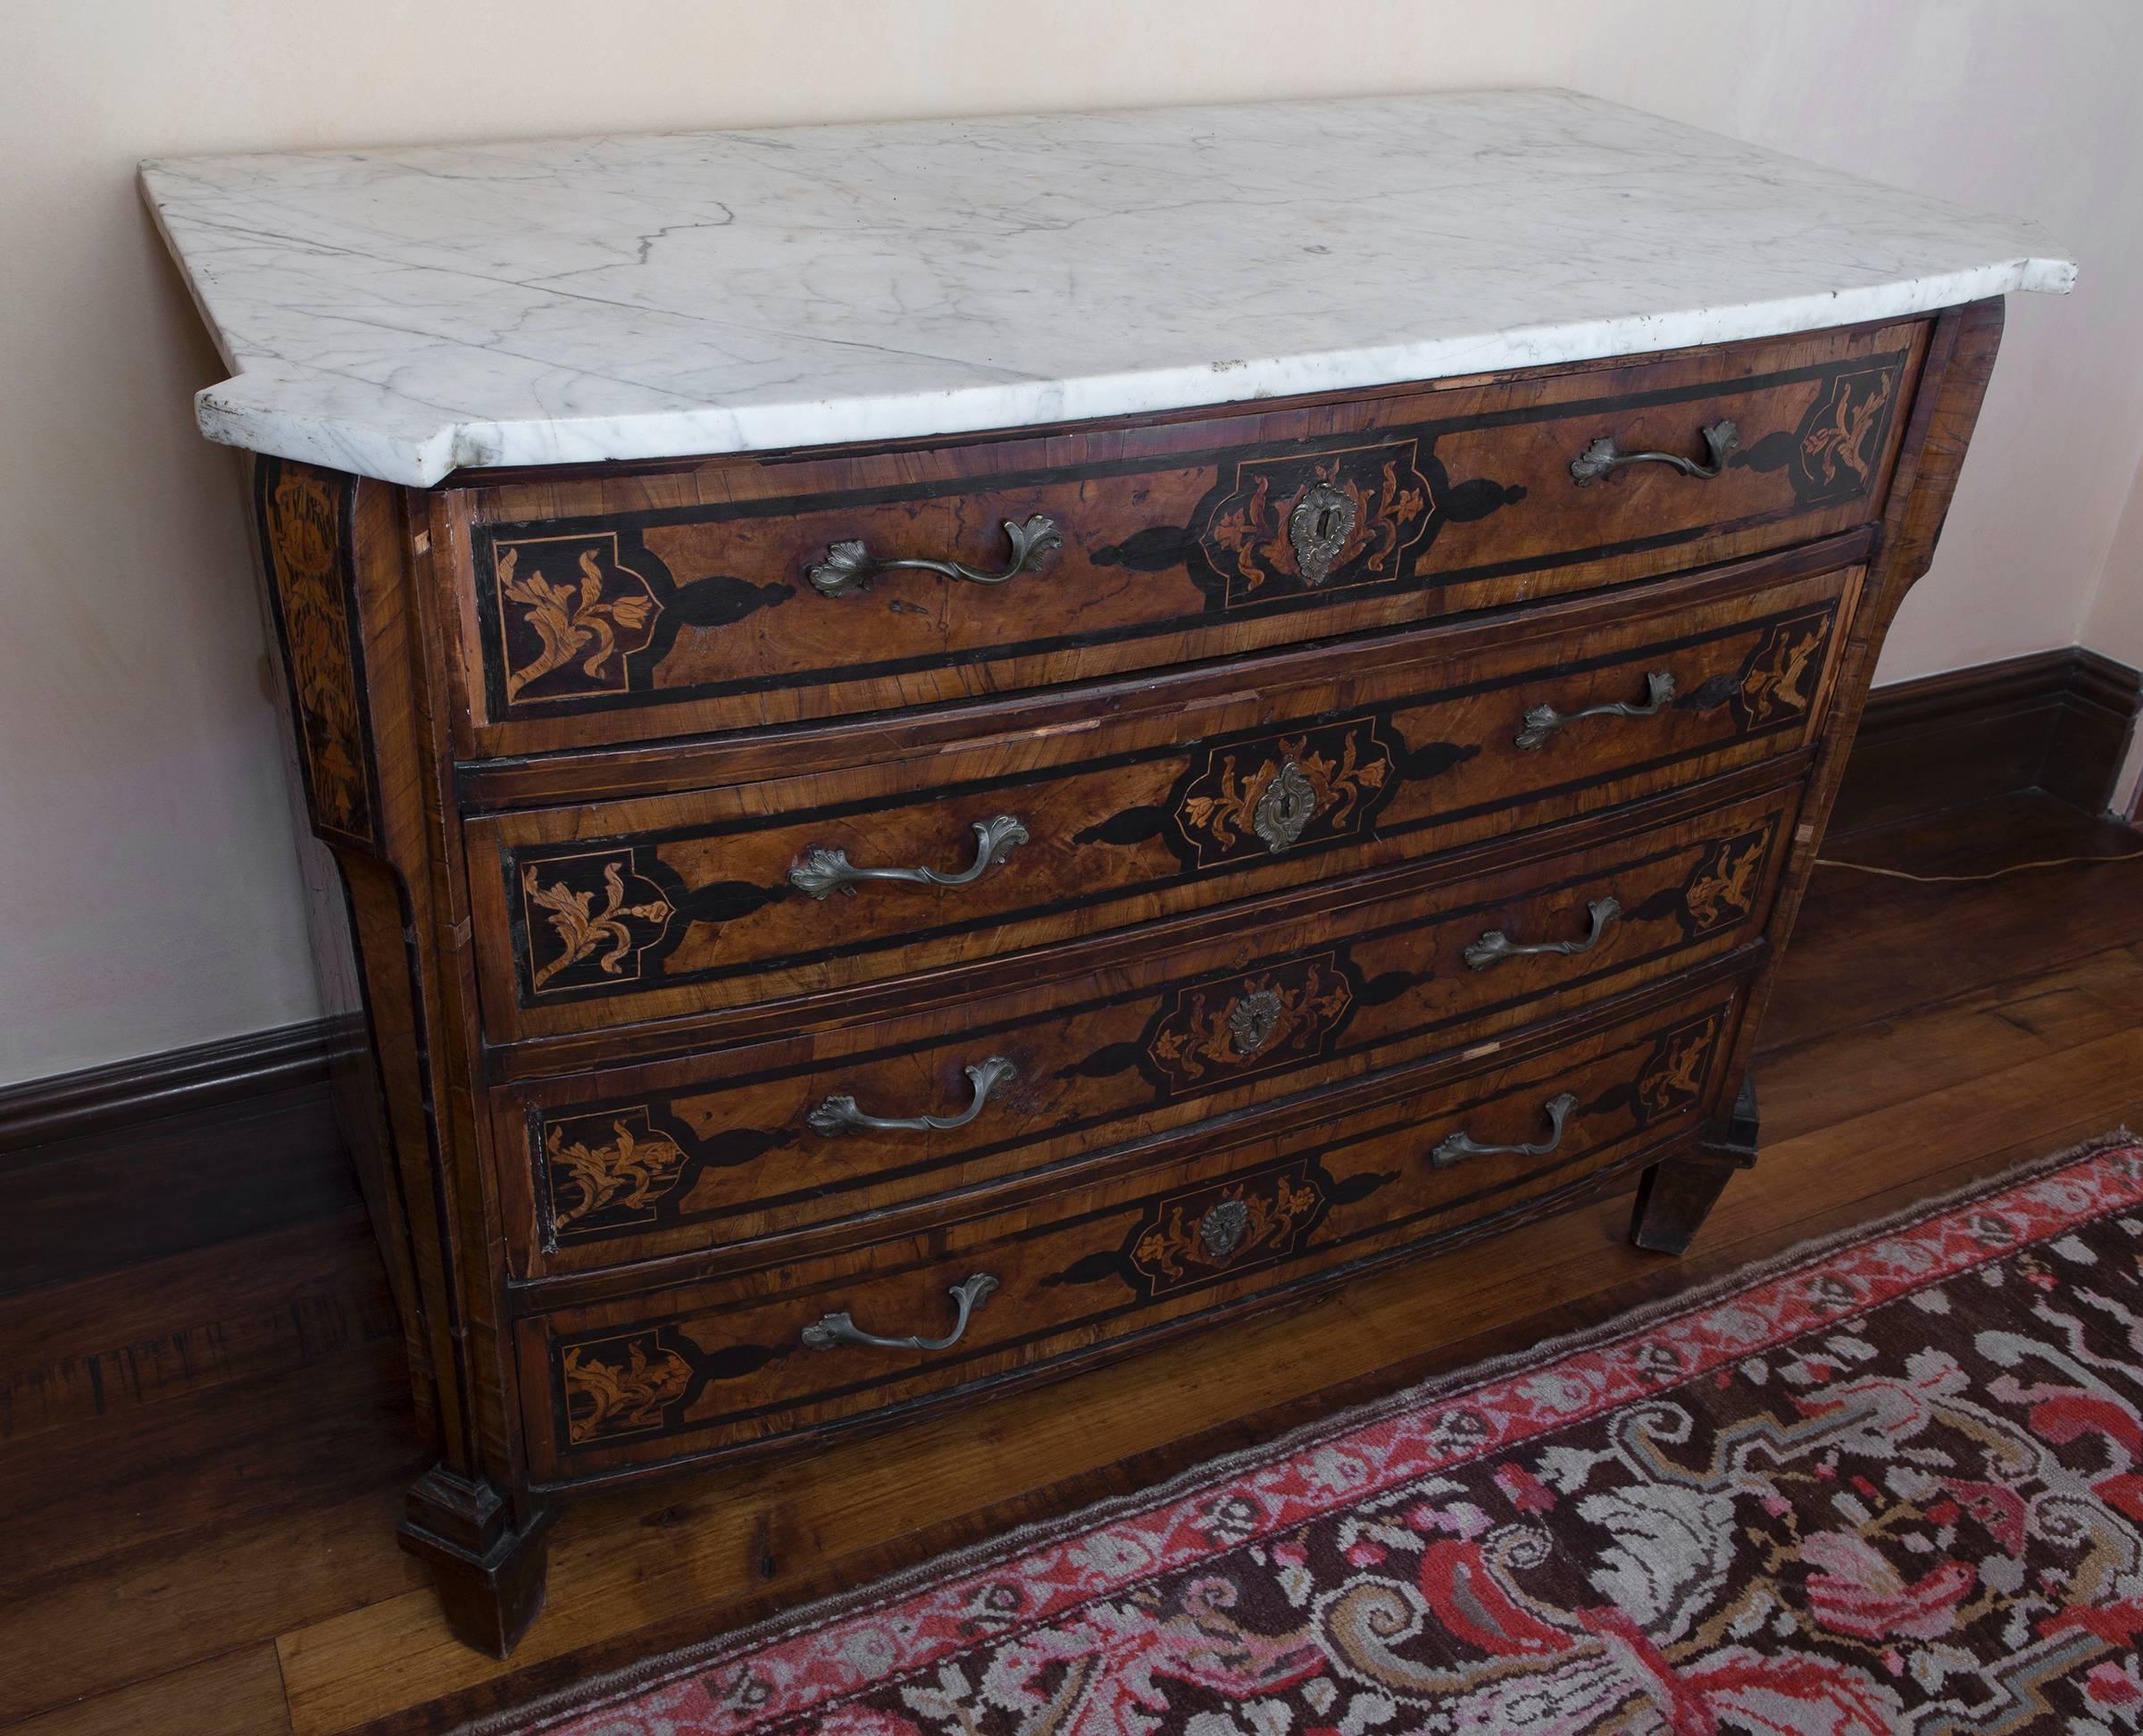 18th century Italian walnut veneered commode of serpentine and bombe shape, floral marquetry with white marble top.